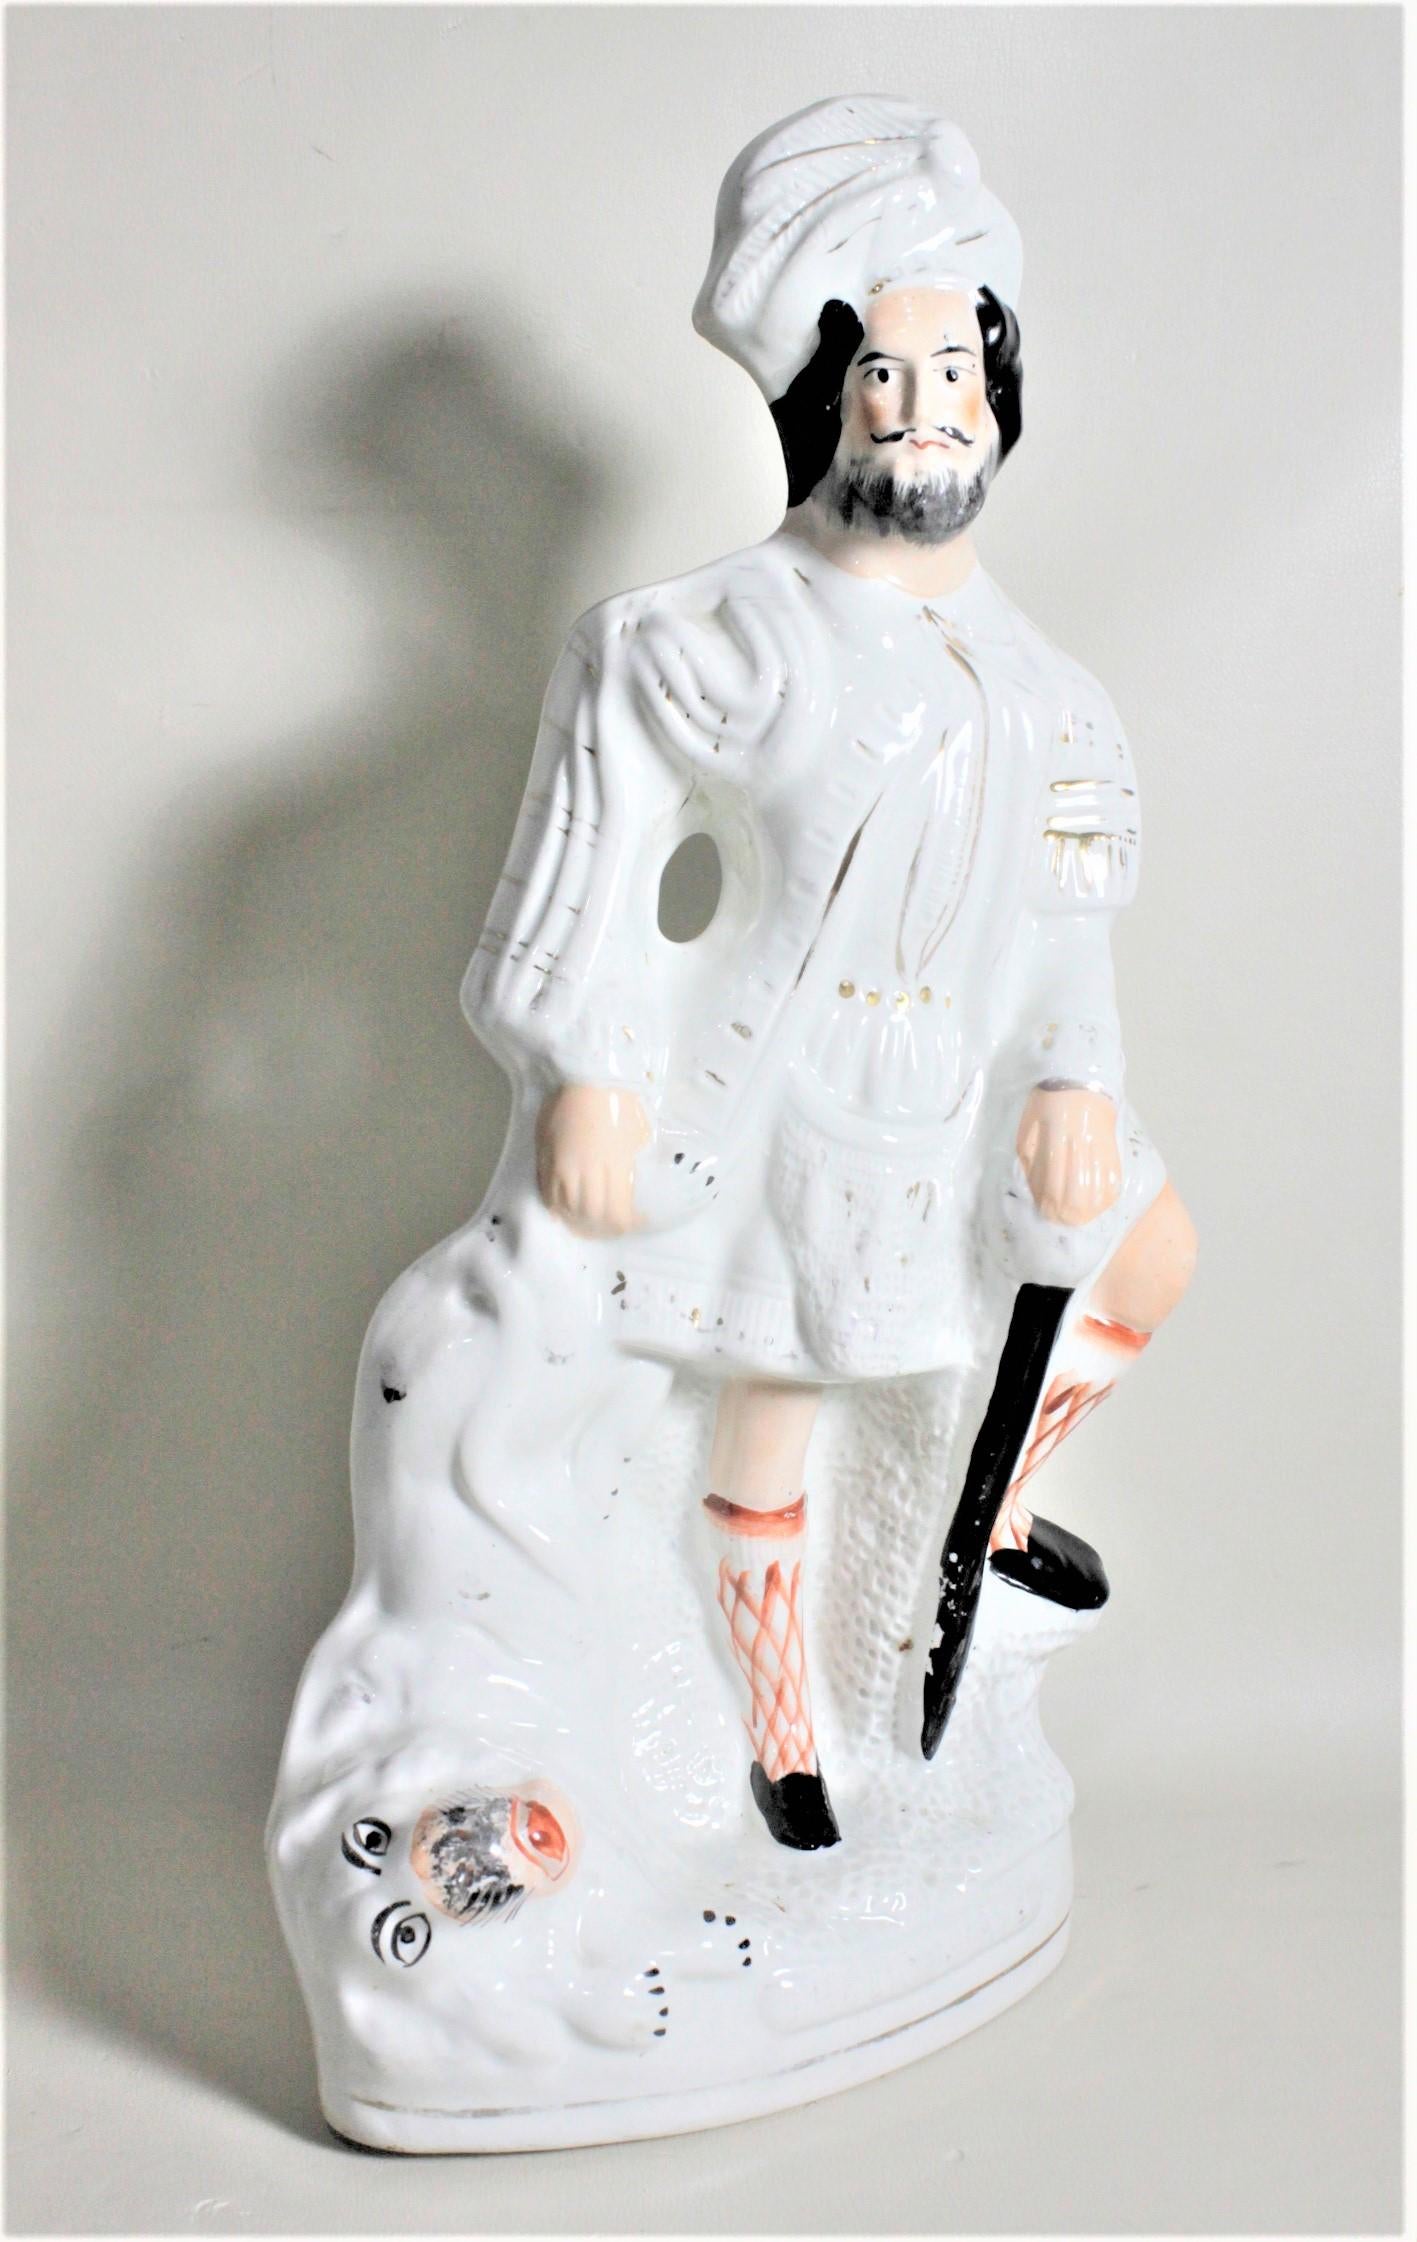 This large antique ceramic figurine was made by Staffordshire of England in circa 1890 in the period Victorian style. The figure is done in the typical cream glaze Staffordshire is known for and has hand painted accents. The figure depicts a